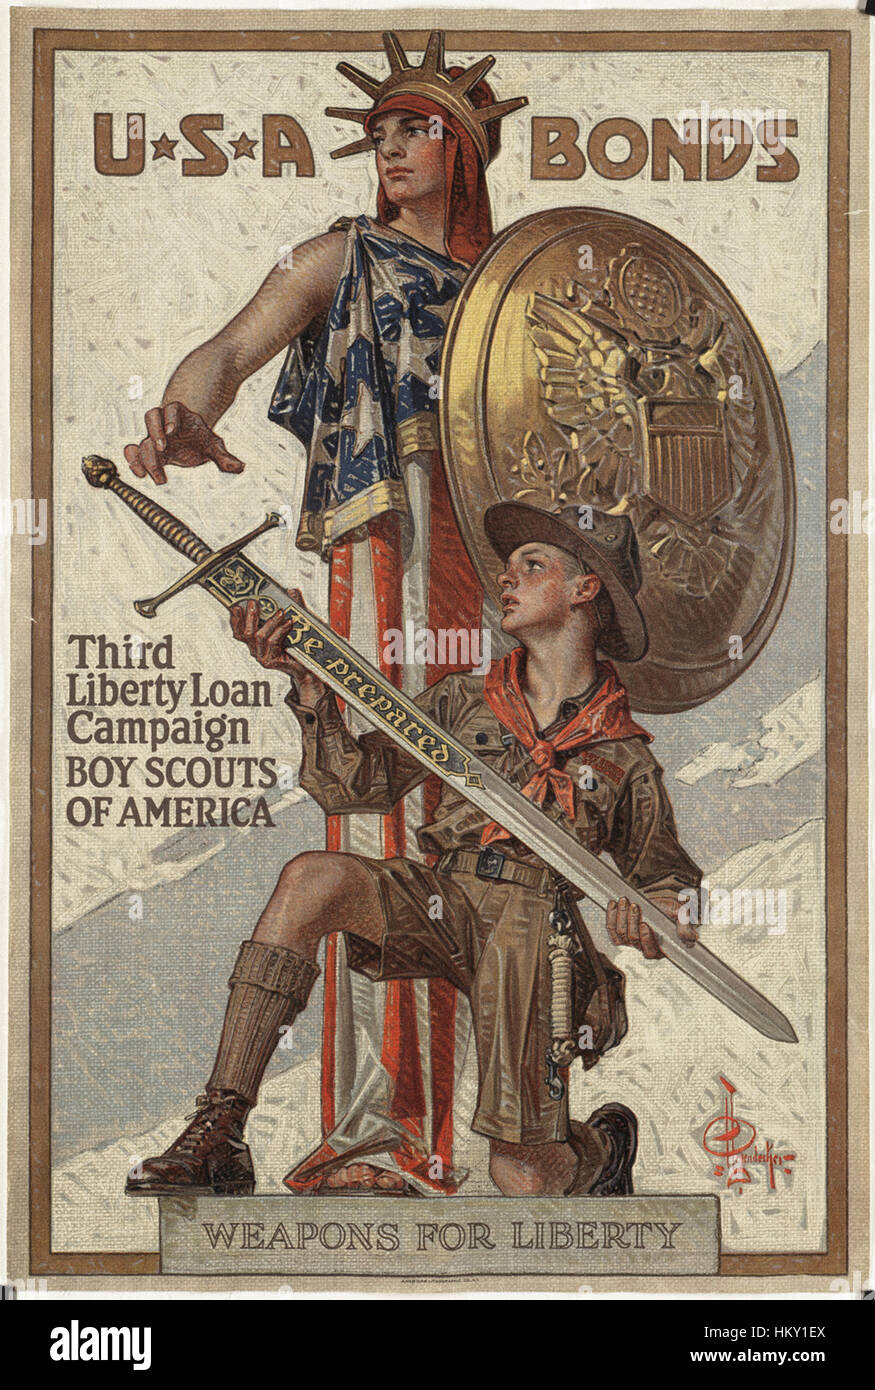 Weapons for liberty. U.S.A. bonds Stock Photo